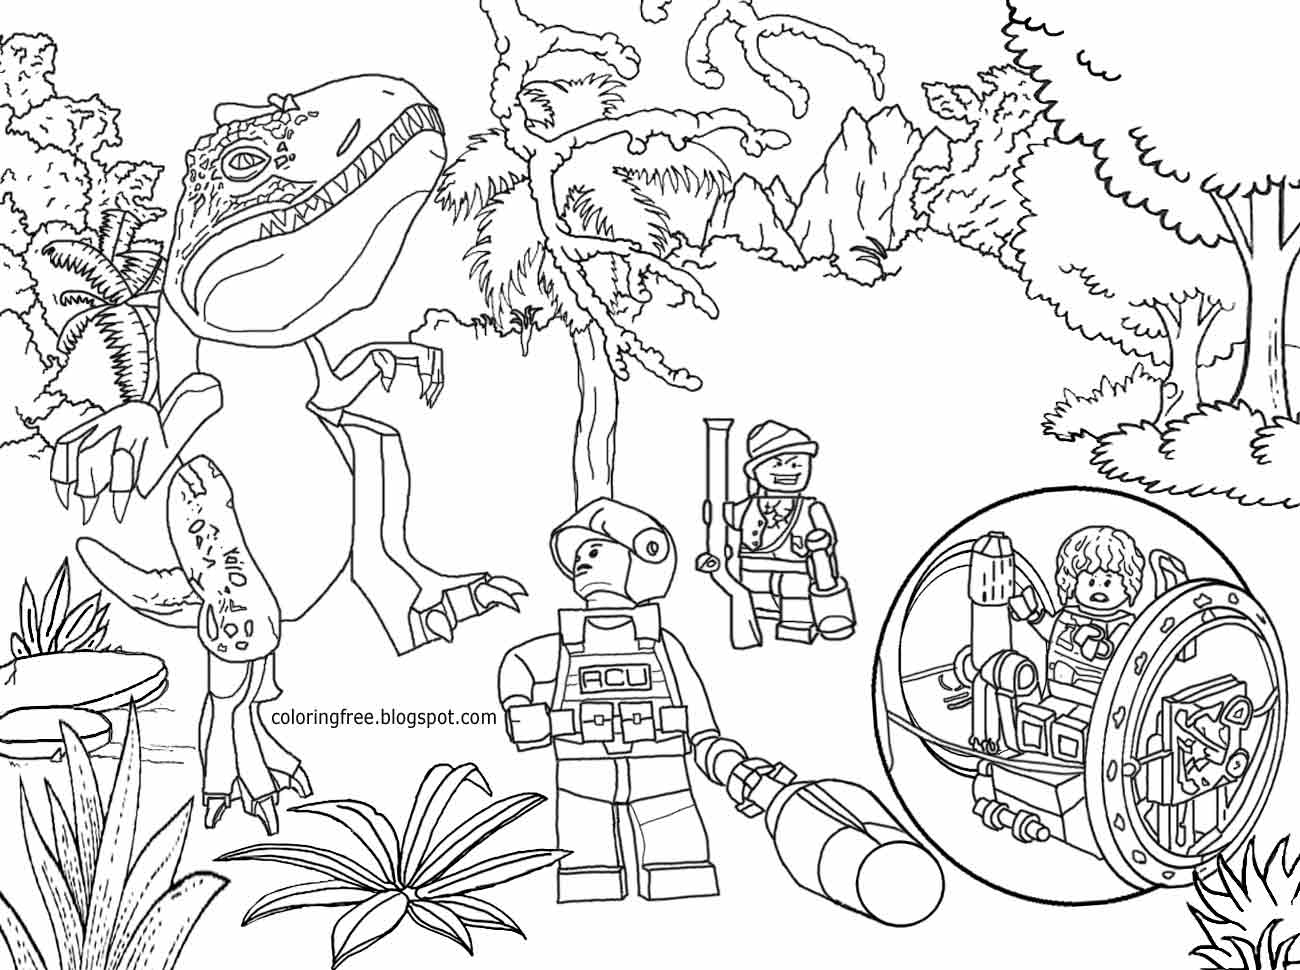 T Rex Lego T Rex Jurassic World Dinosaur Coloring Pages - pic-home